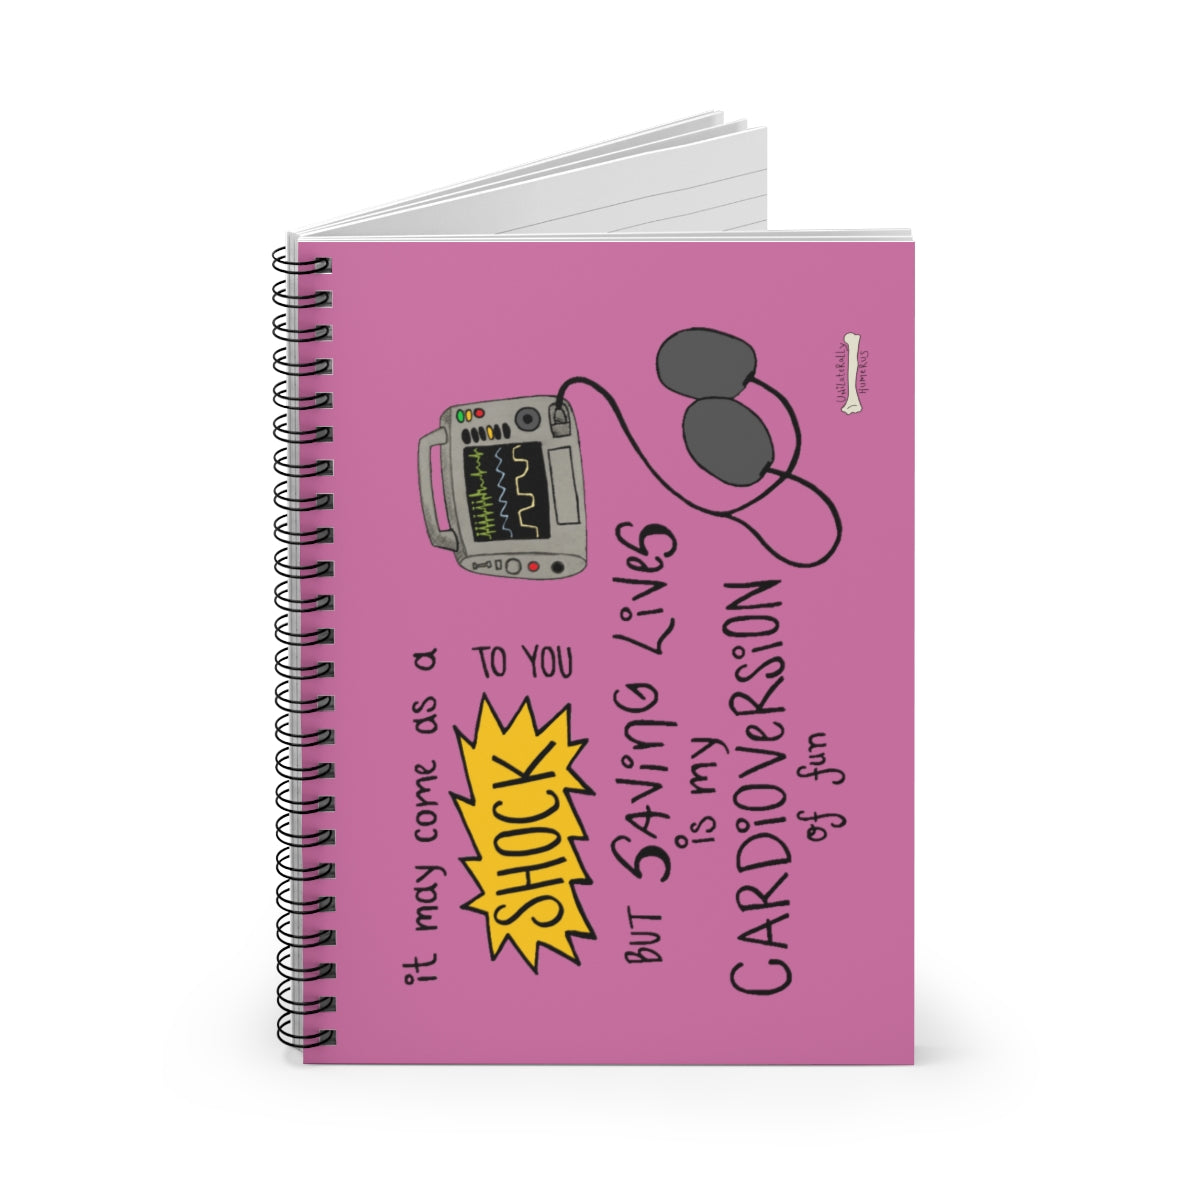 Cardioversion of Fun Spiral Notebook